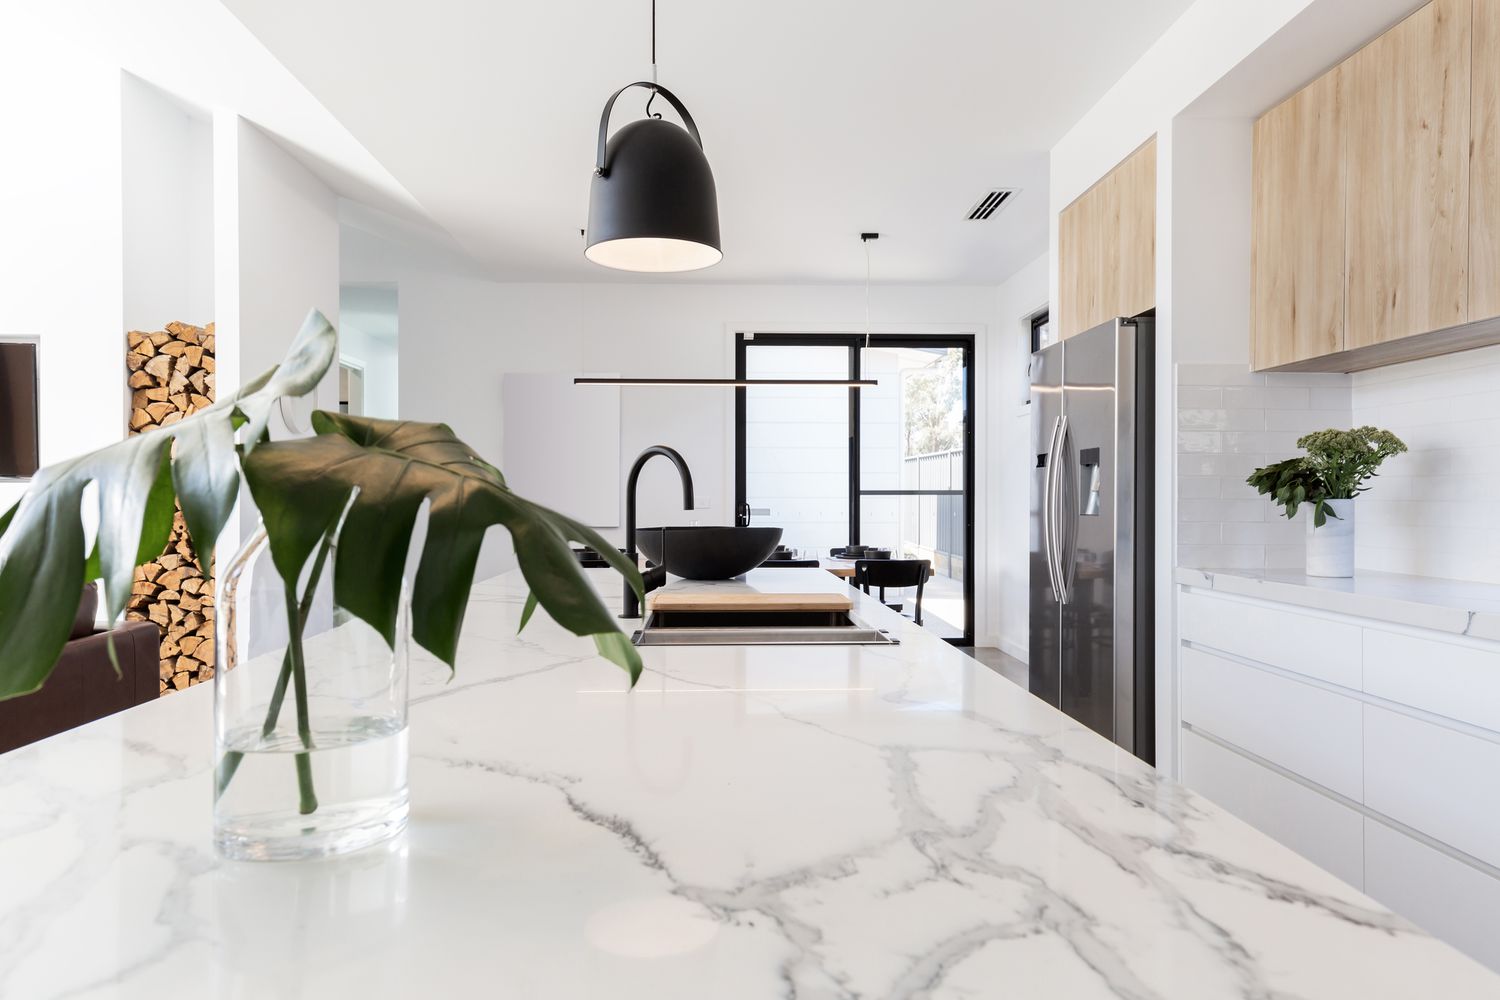 How to tile countertops – with top tips from the experts